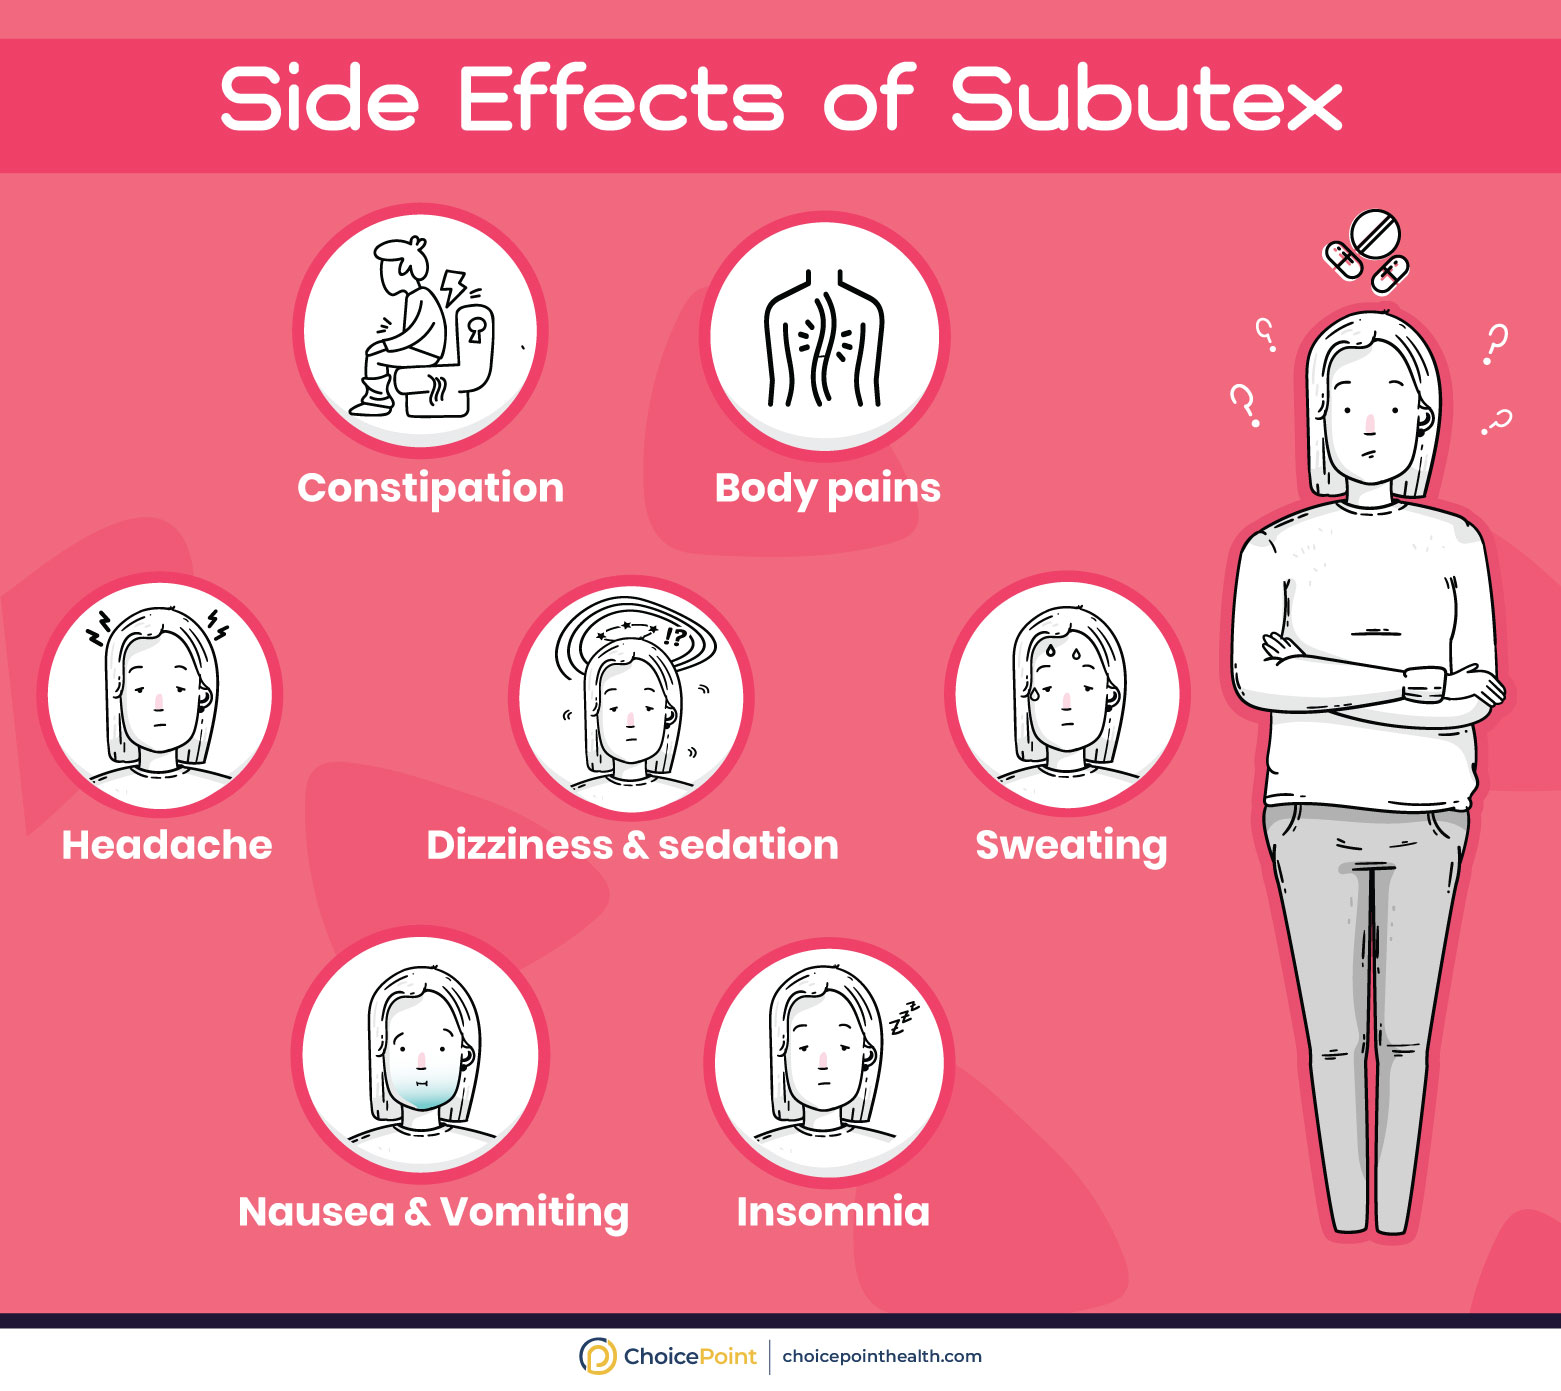 Subutex Short and Long-Term Side Effects